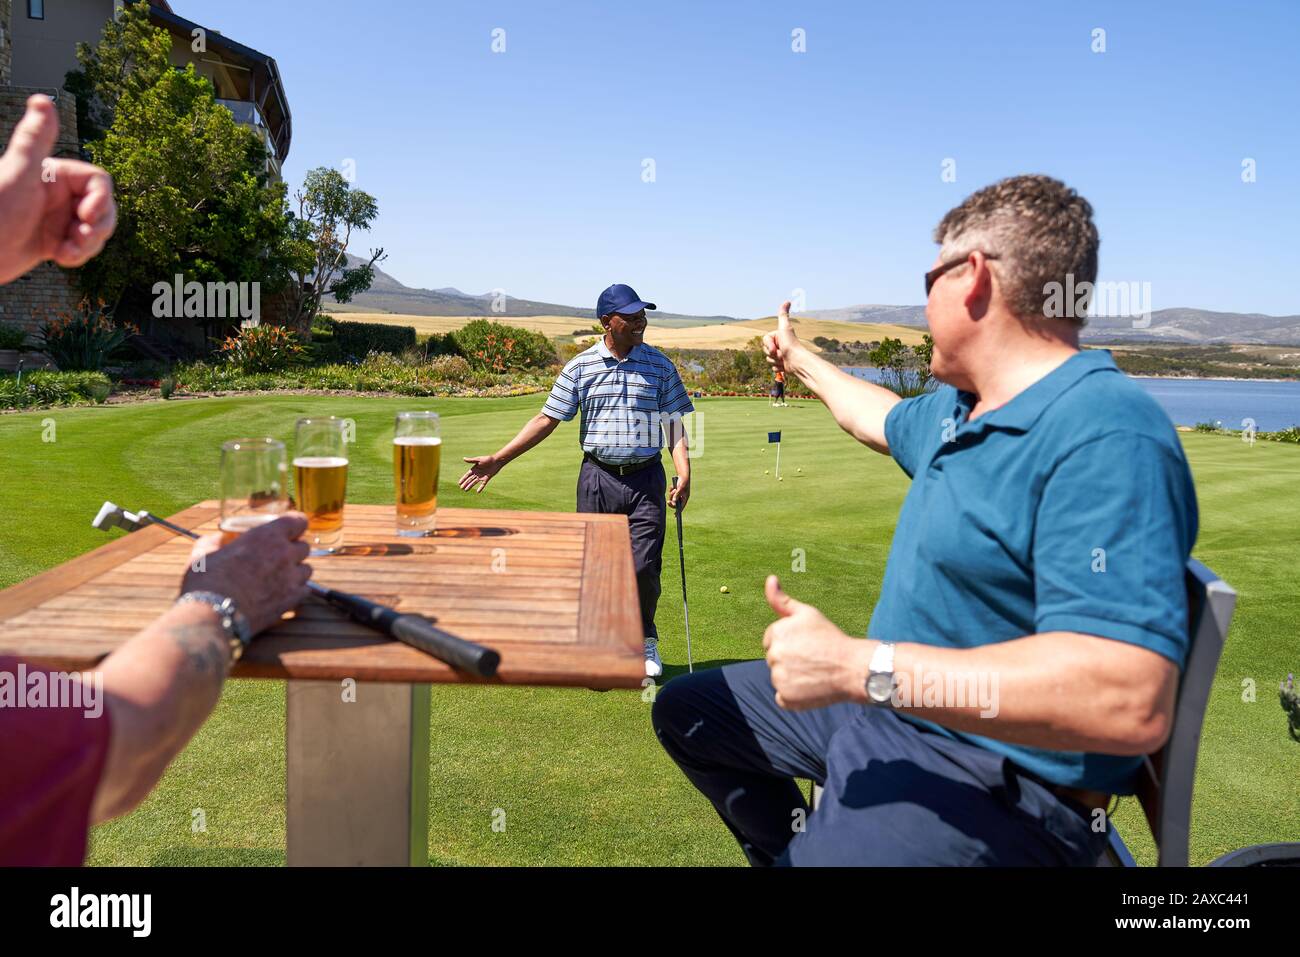 Male golfers drinking beer cheering friend on practice putting green Stock Photo